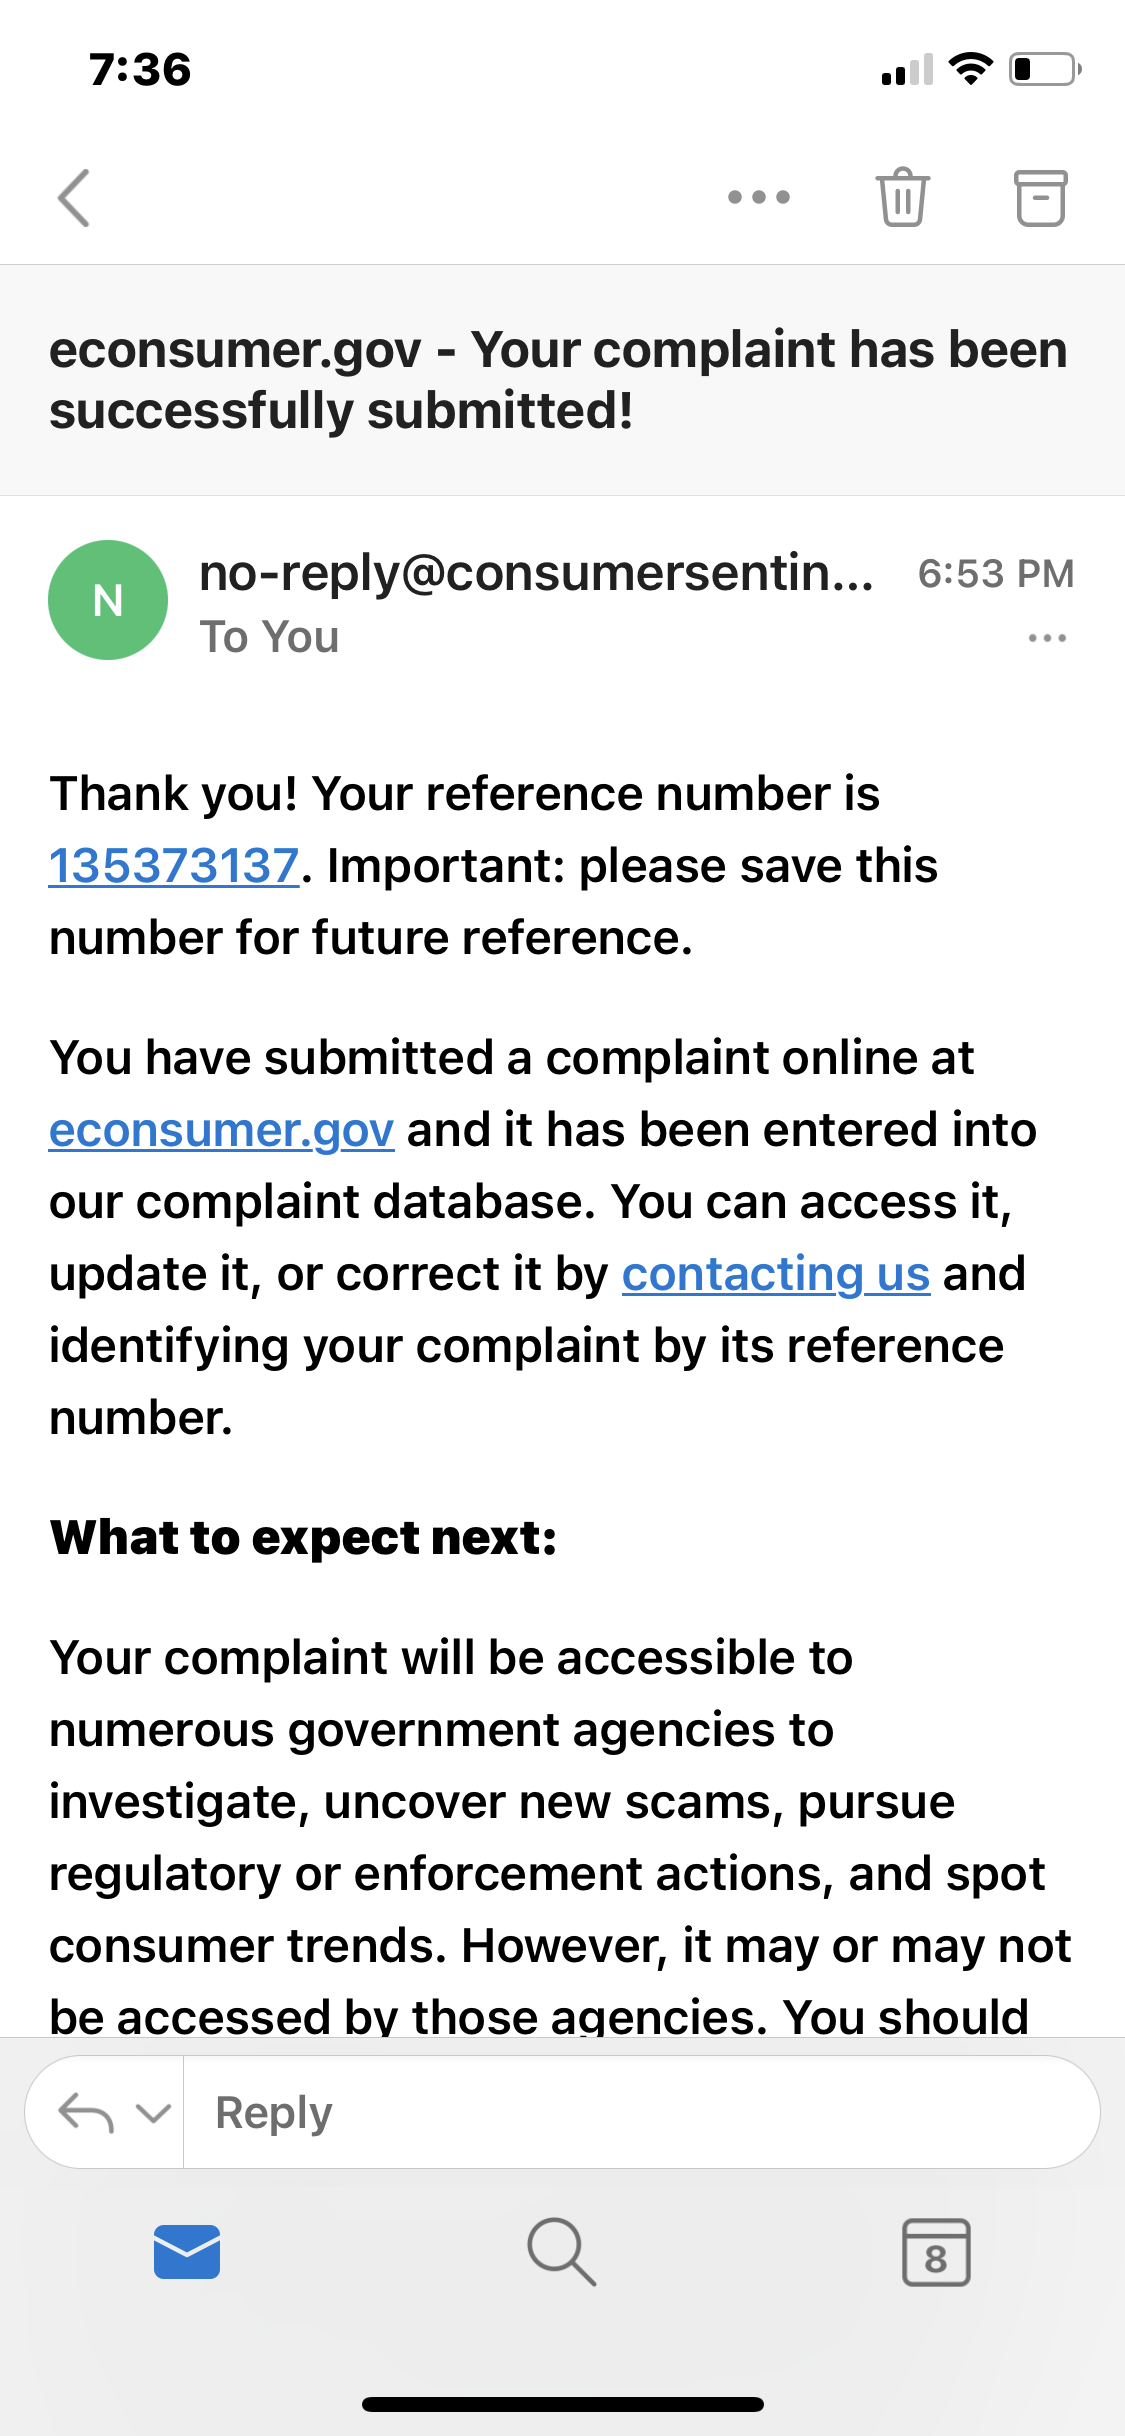 Filed a complaint with econsumer.gov